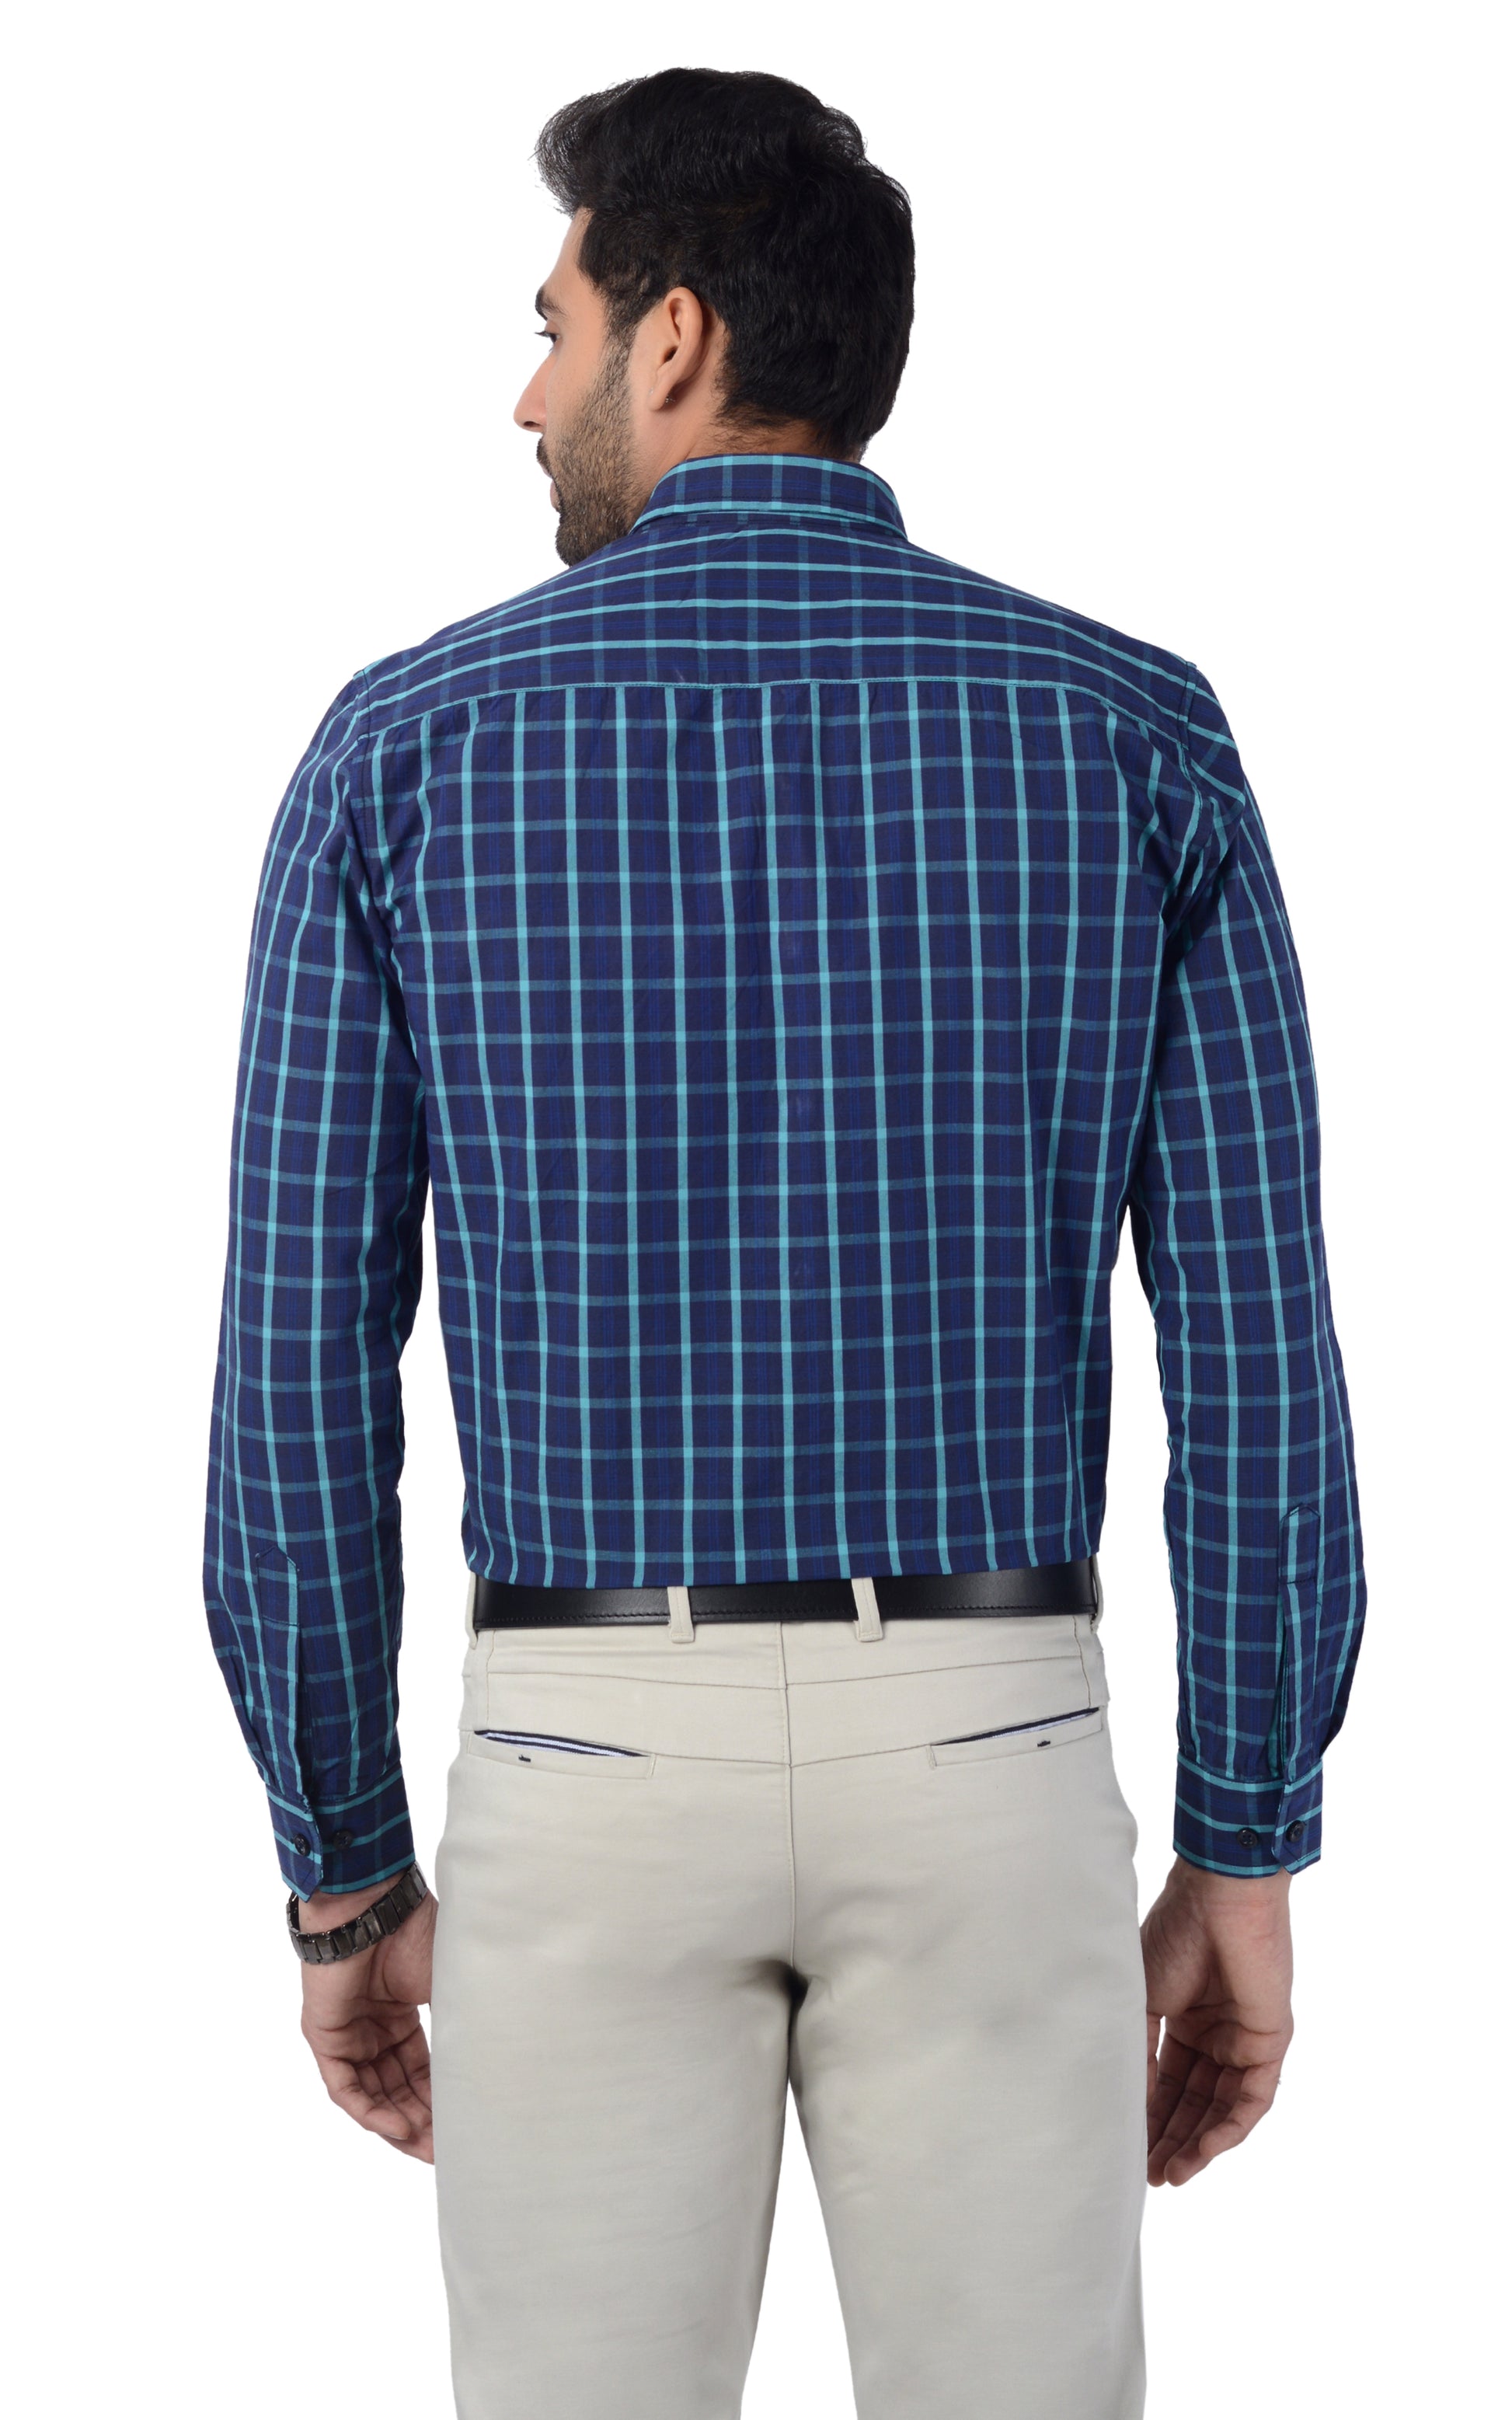 5thanfold Men's Formal  Pure Cotton Full Sleeve Checkered Blue Slim Fit Shirt